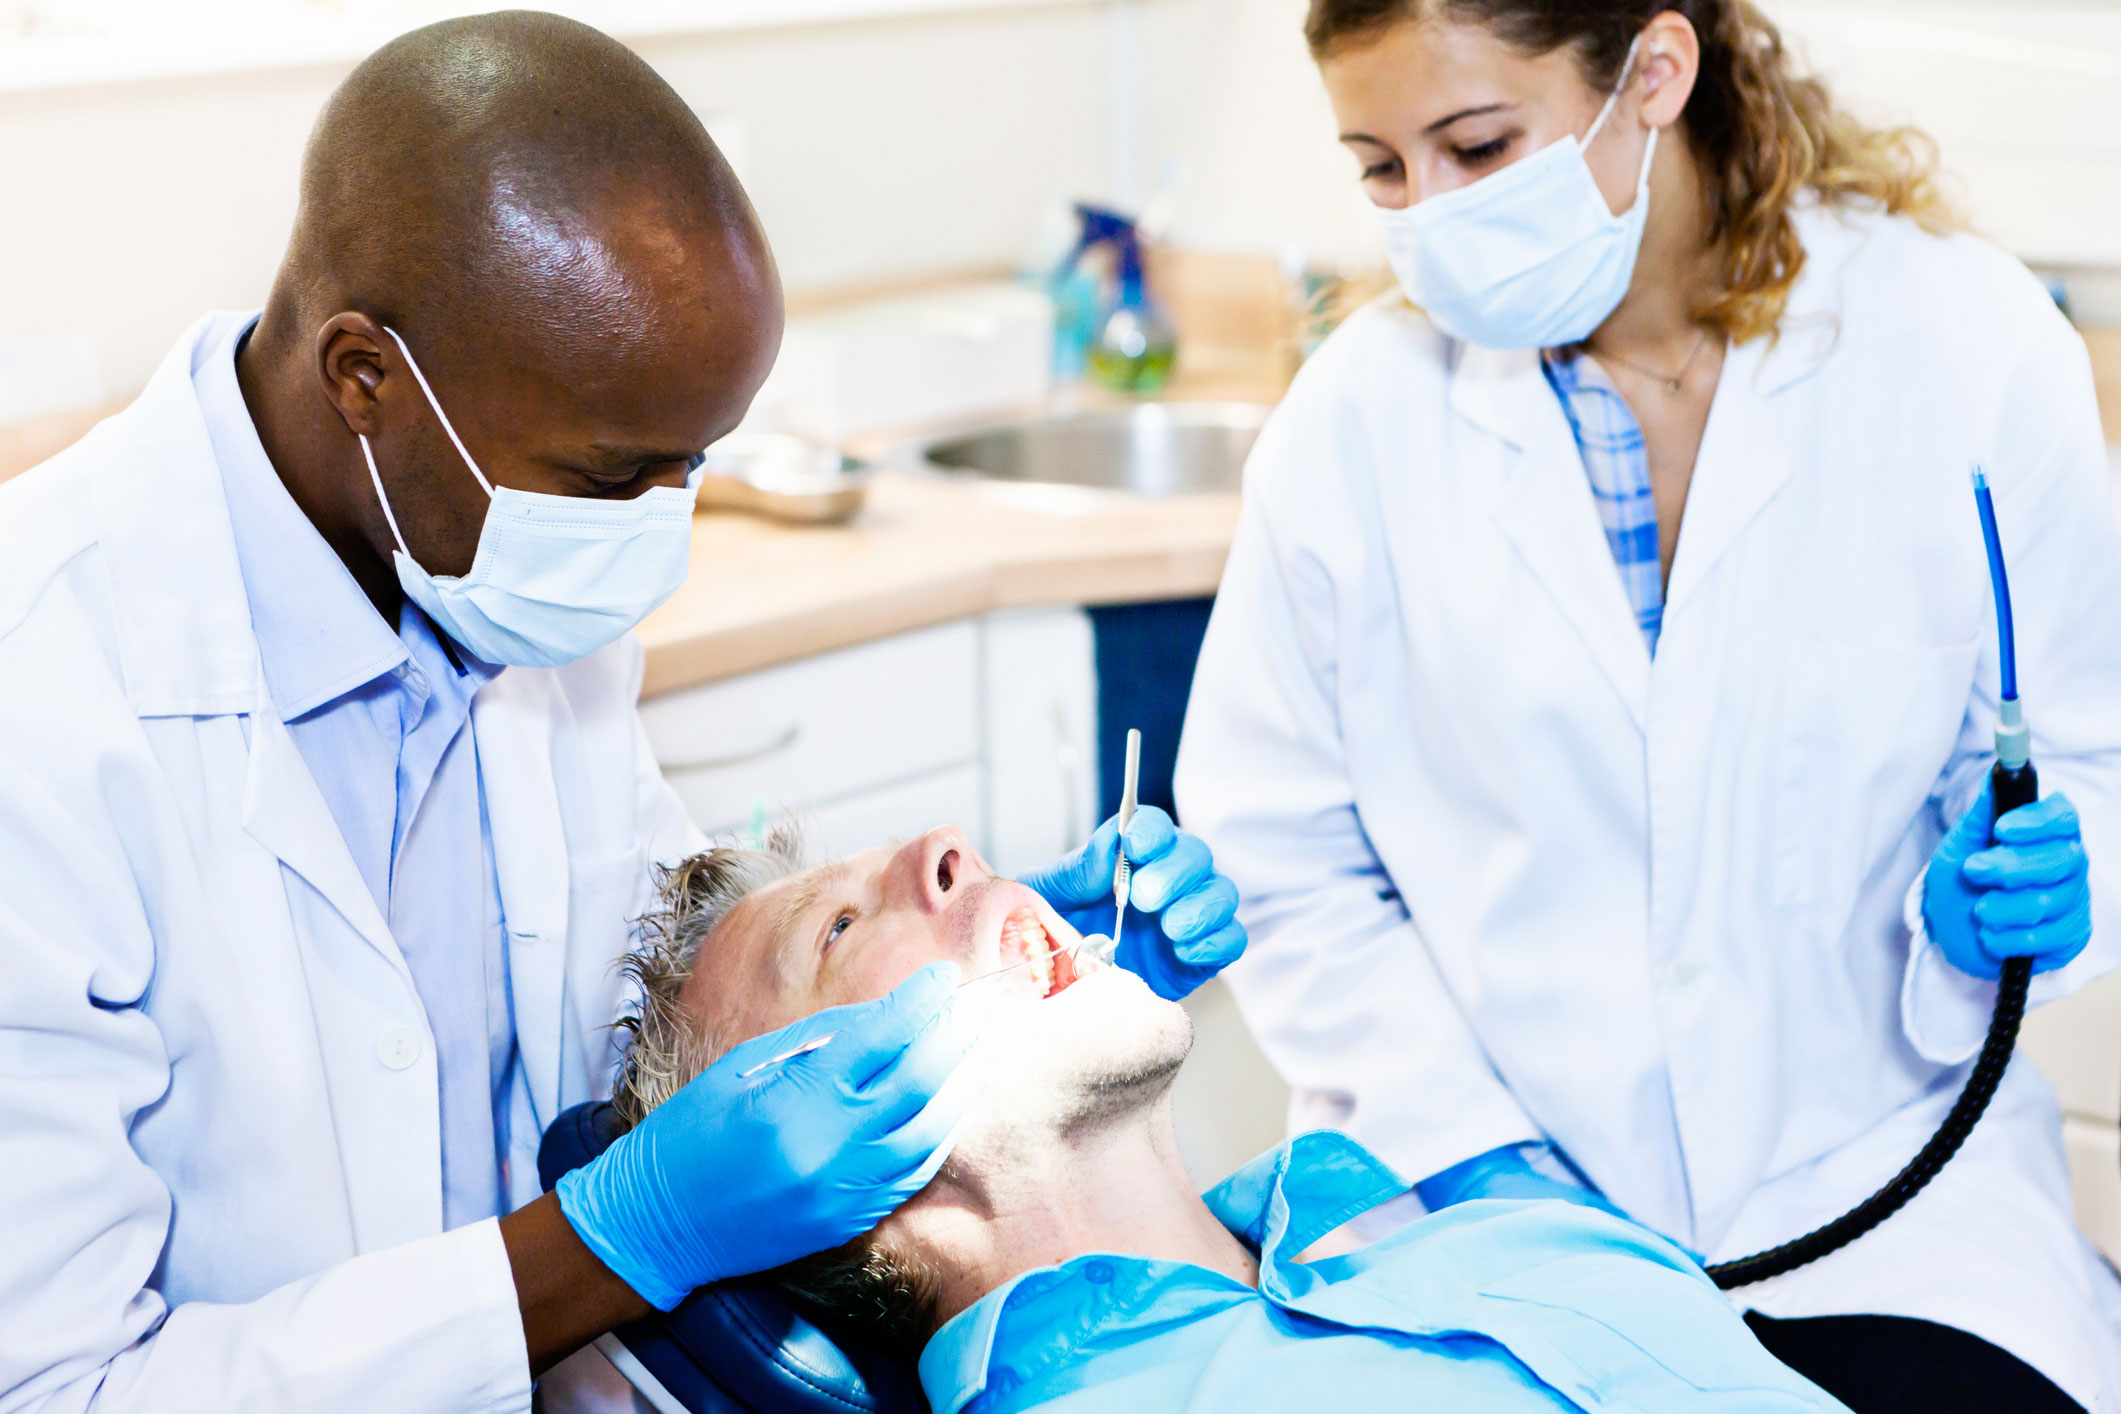 Female dental assistant is assisting the dentist with a patient in the dental office